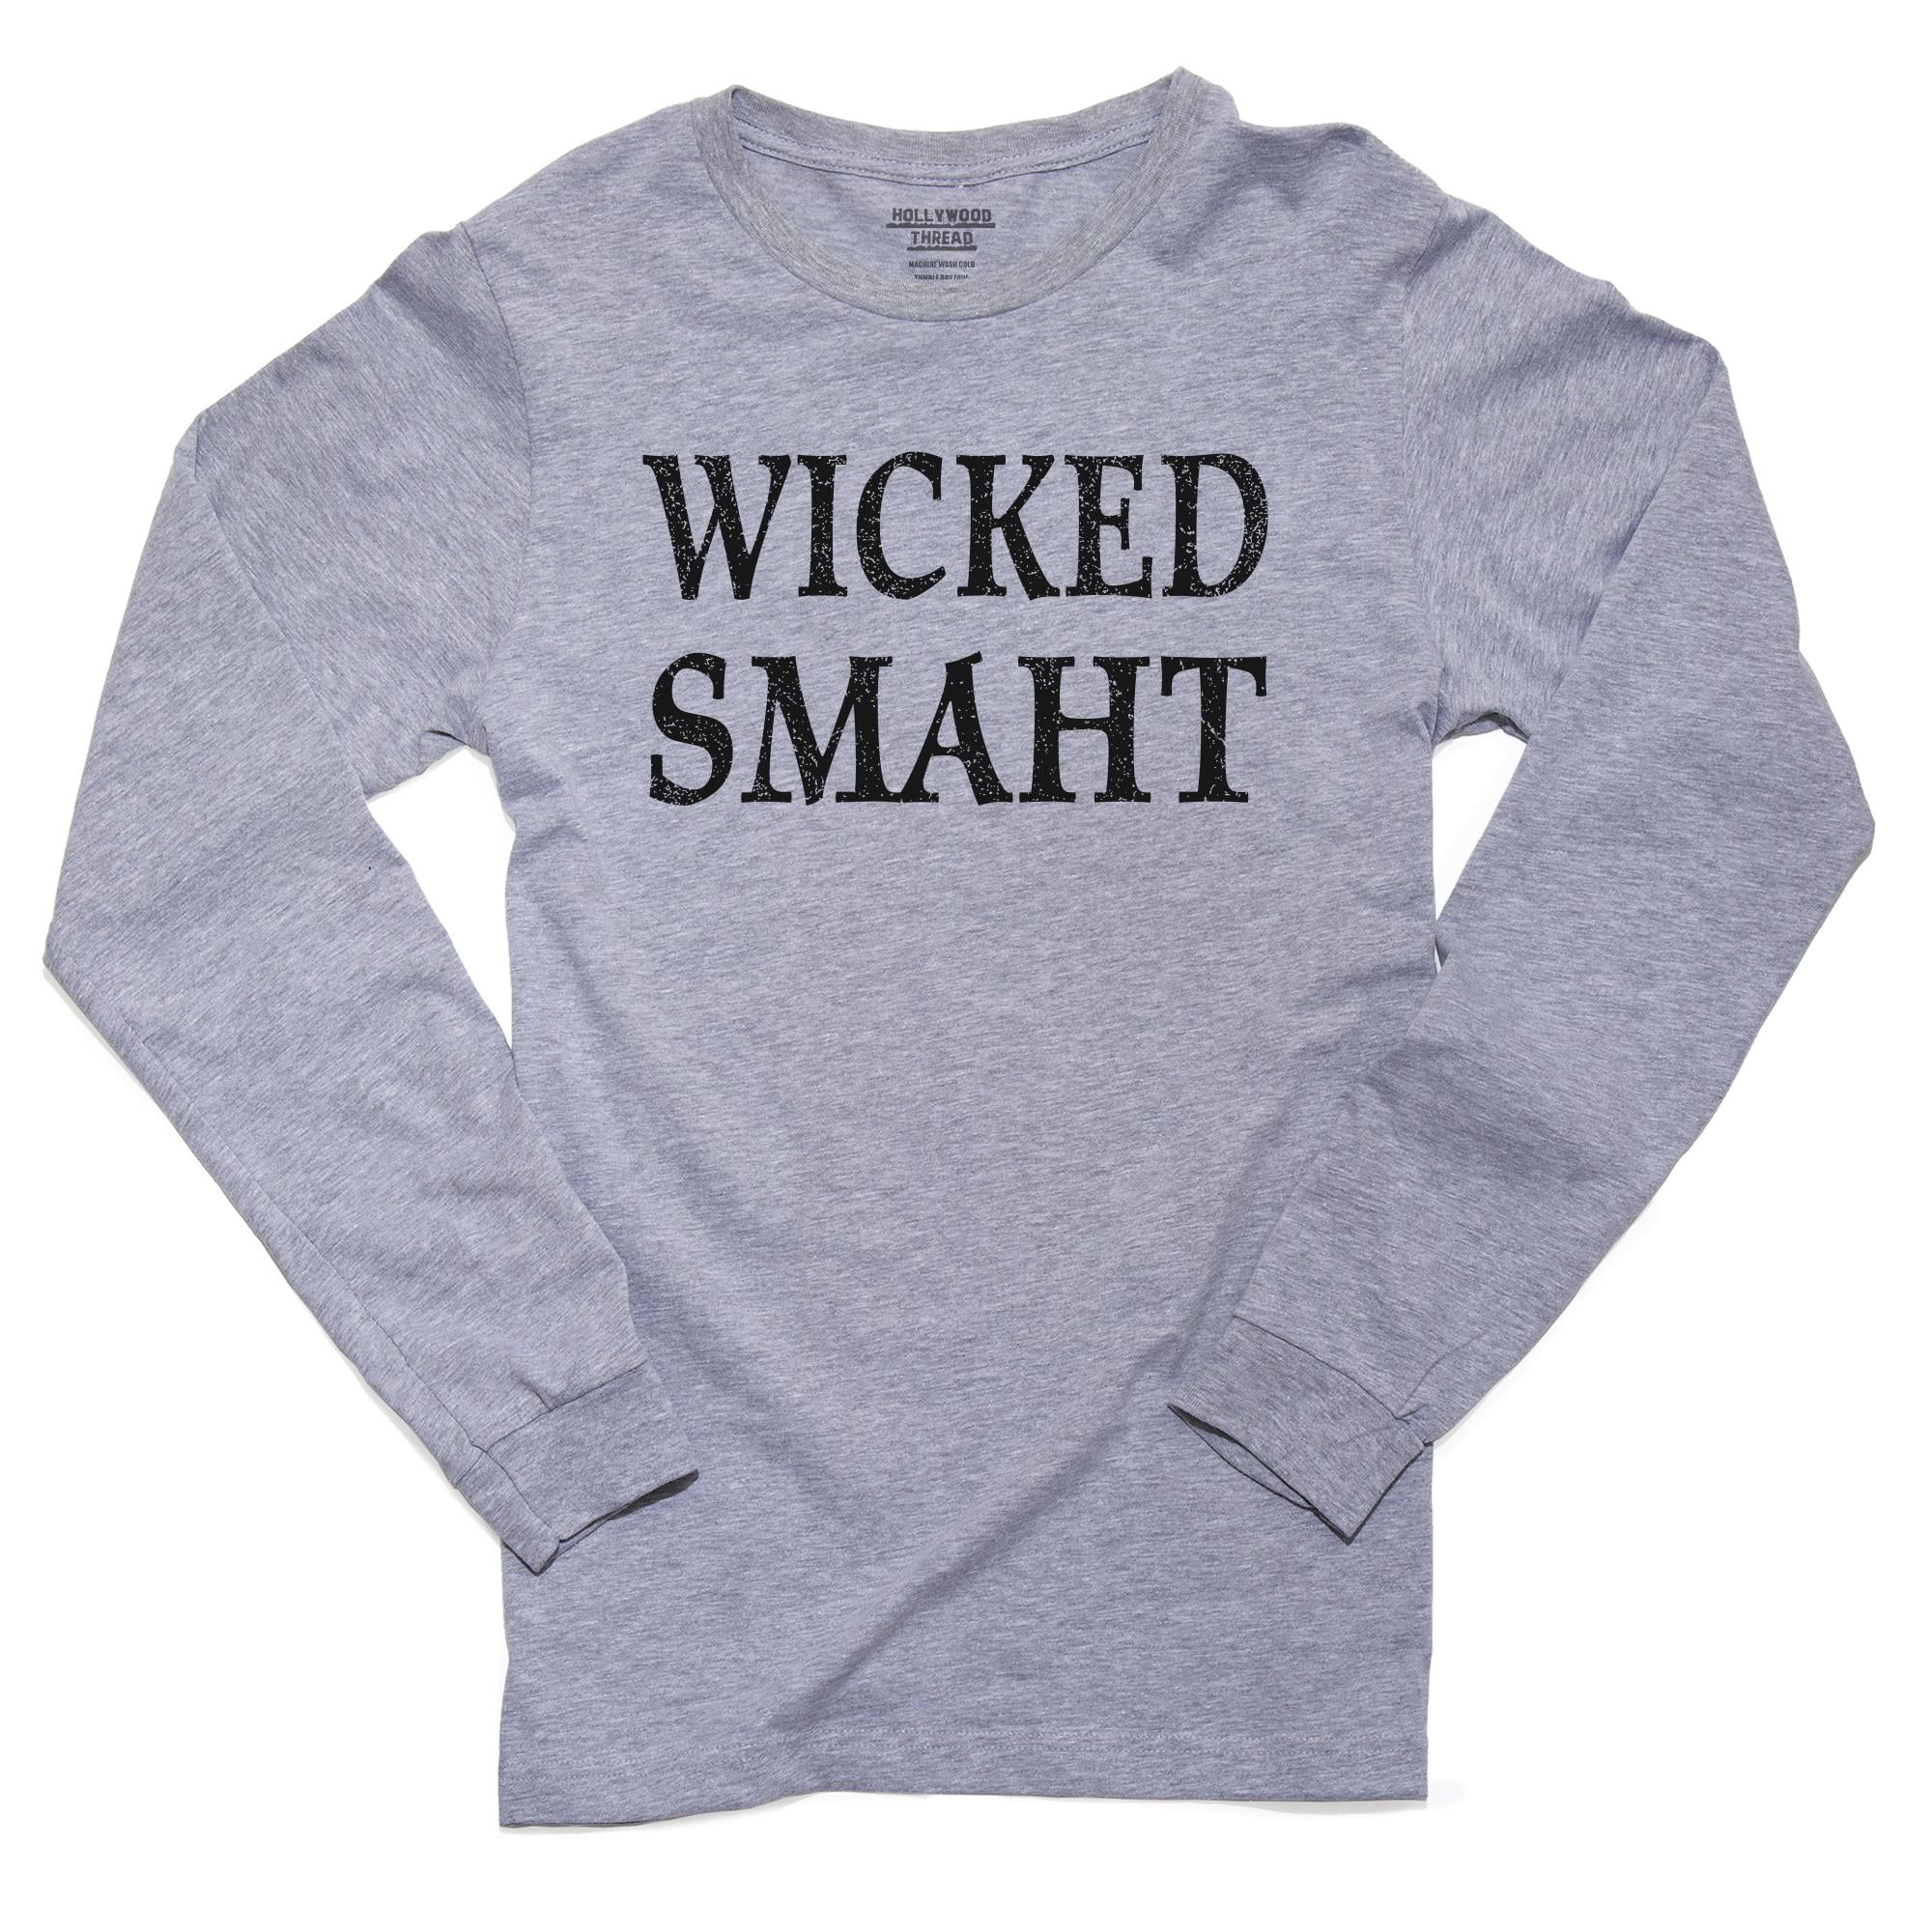 WICKED SMAHT - Wicked Smart New England Saying Men's Long Sleeve Grey T ...